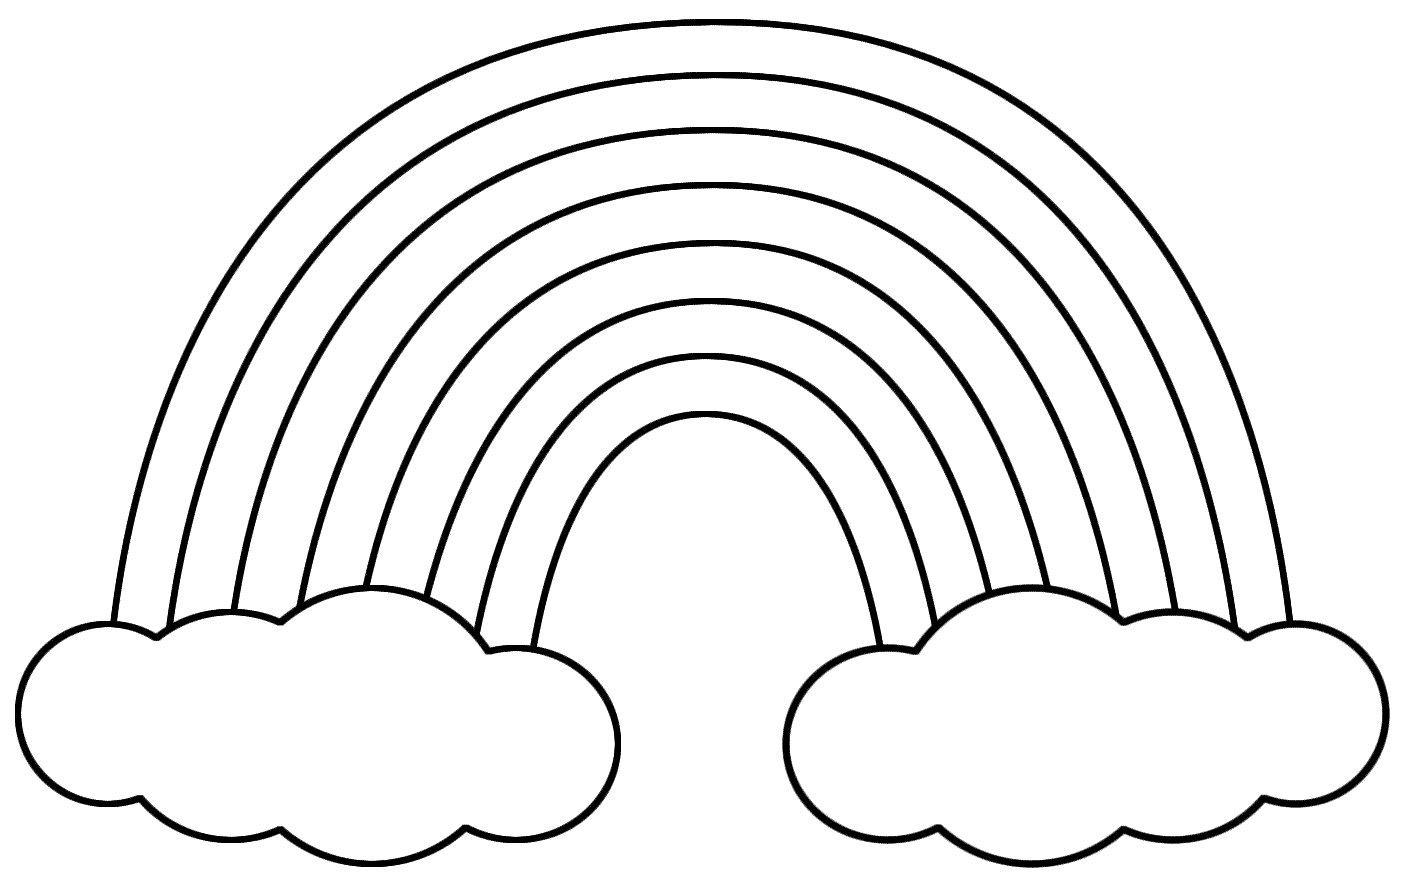 Rainbow with Clouds Coloring Page Image